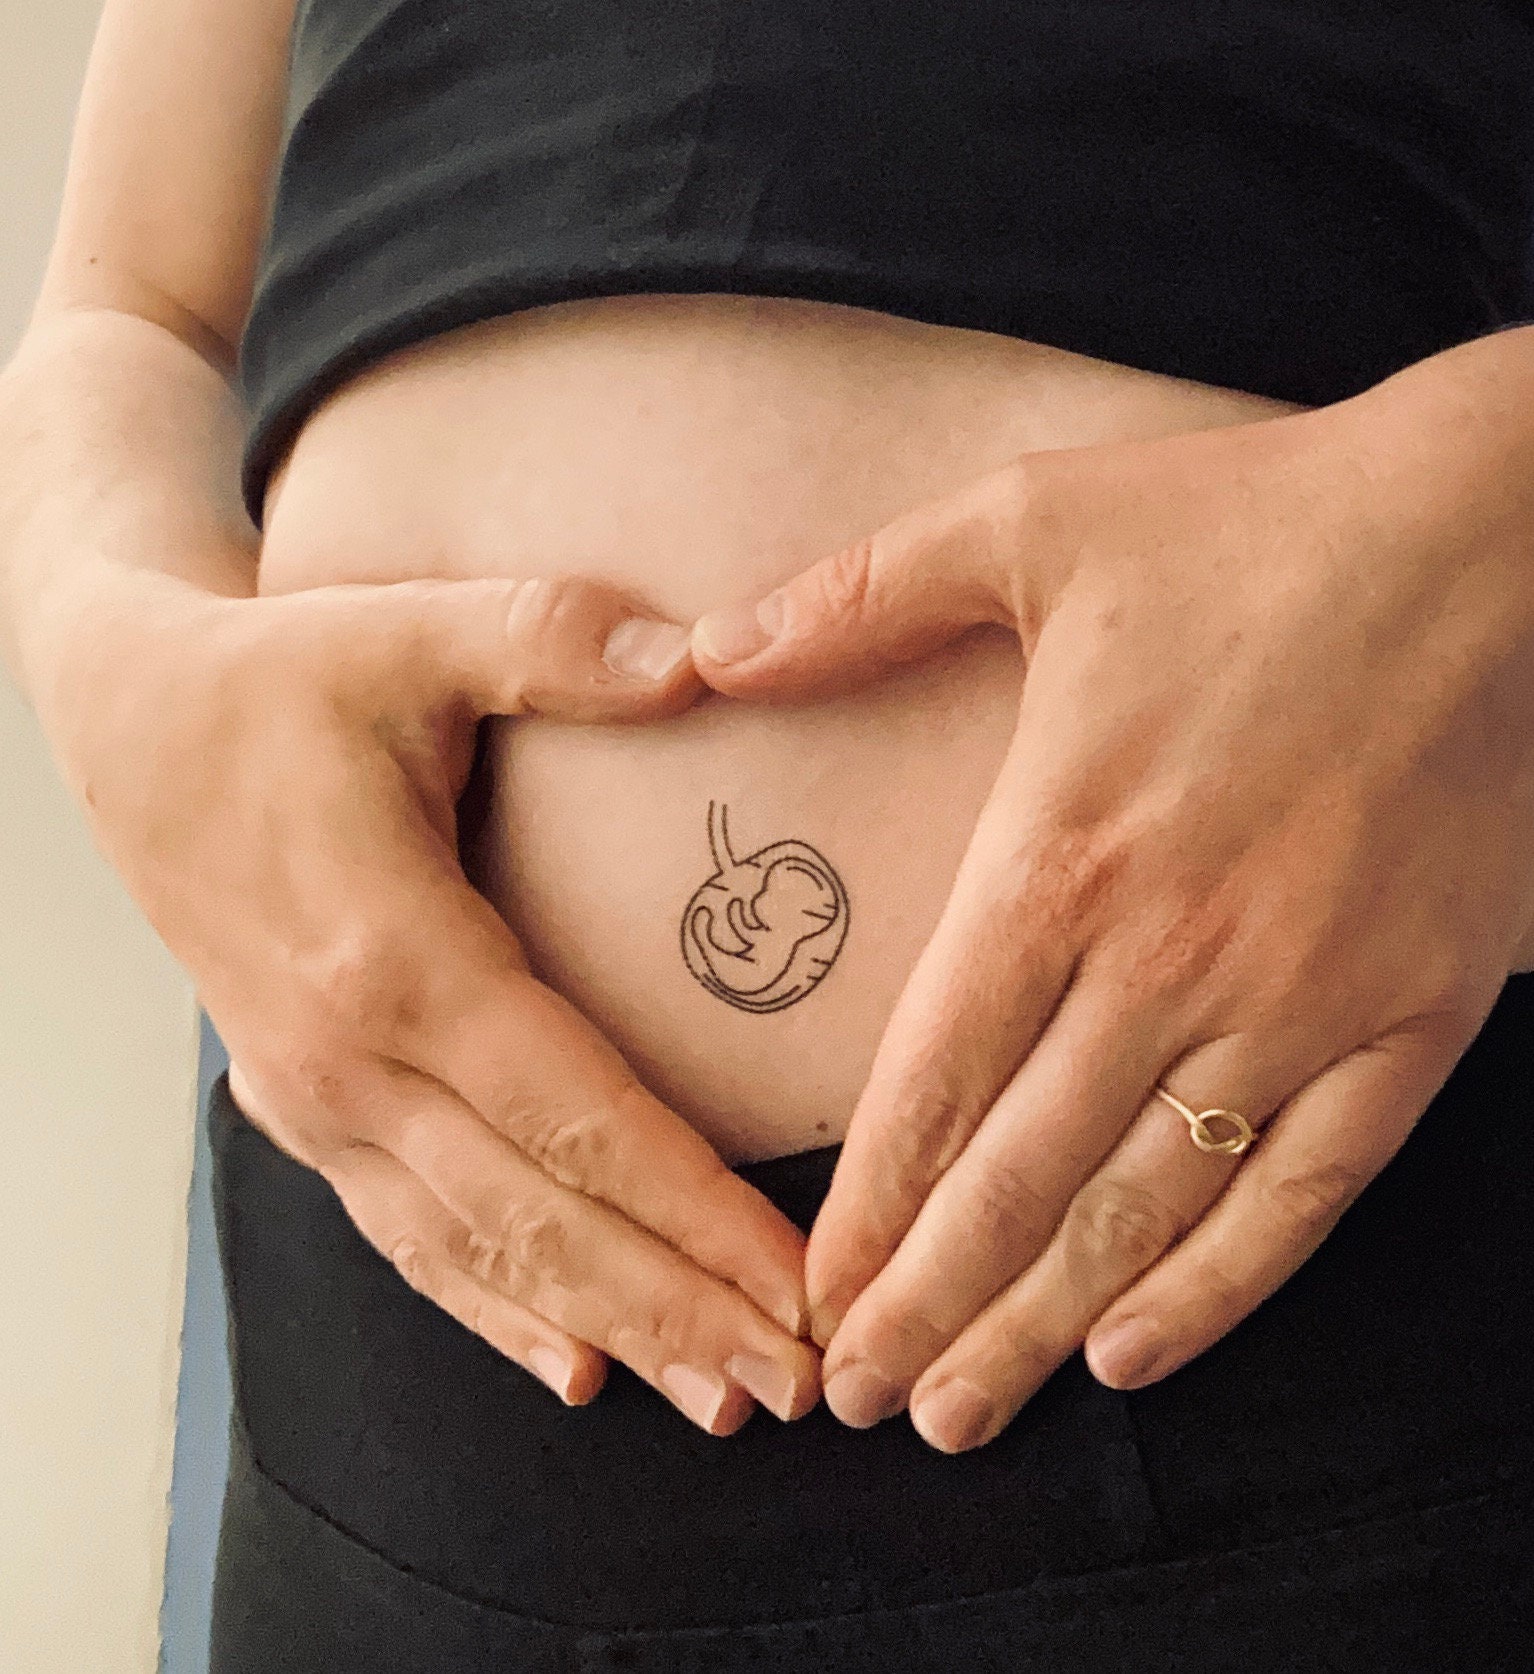 Miscarriage tattoo: How one woman remembers her baby